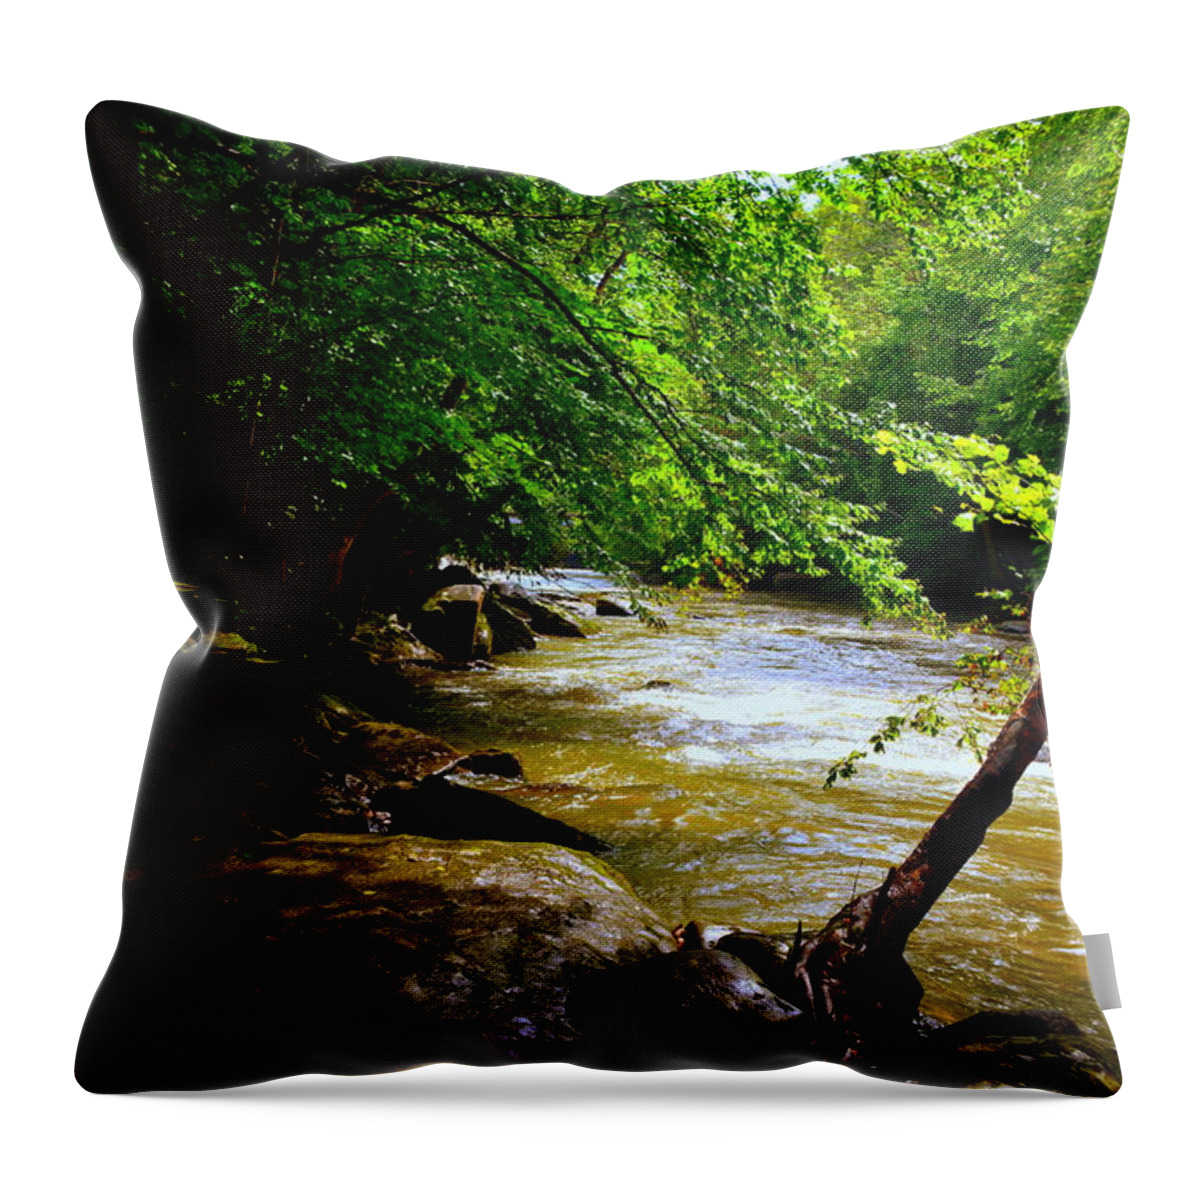 A Peaceful Place Throw Pillow featuring the photograph A Peaceful Place by Lisa Wooten